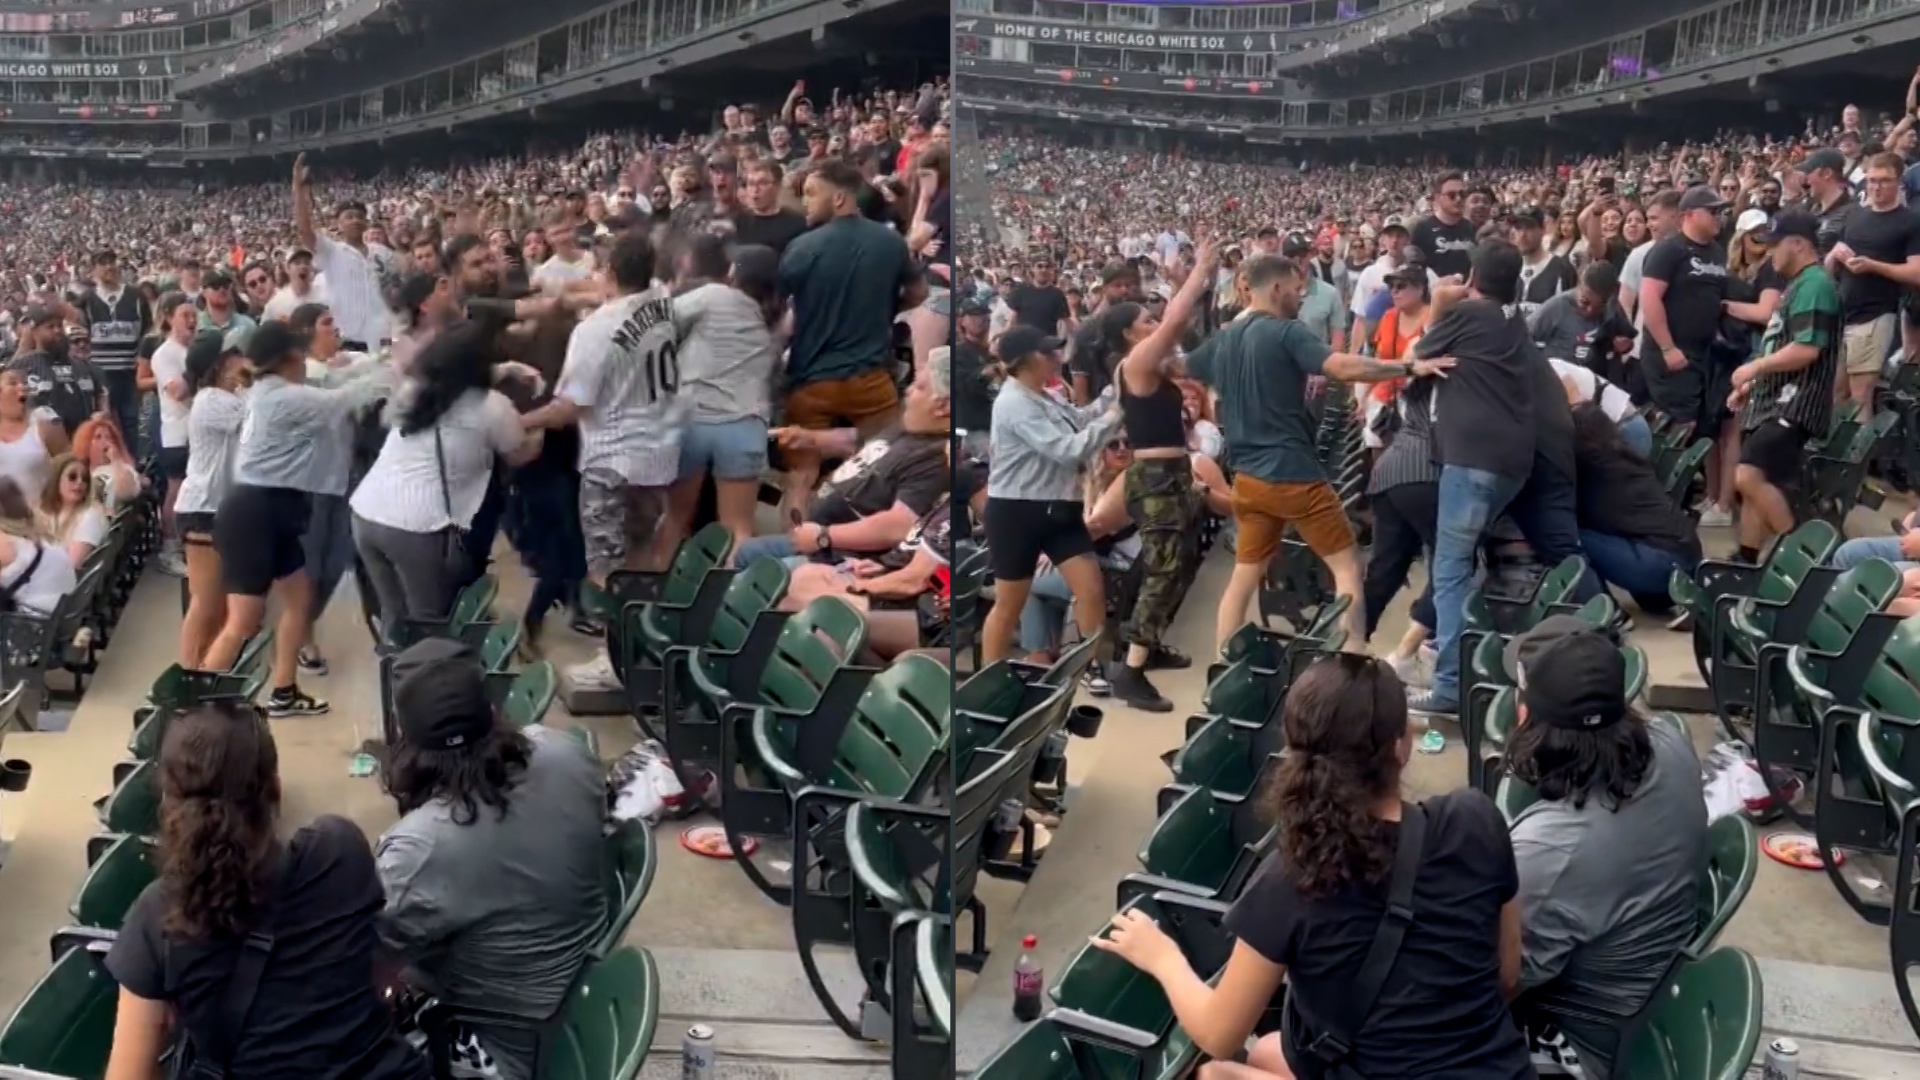 Enormous brawl breaks out at White Sox game involving huge numbers of aggressive fans